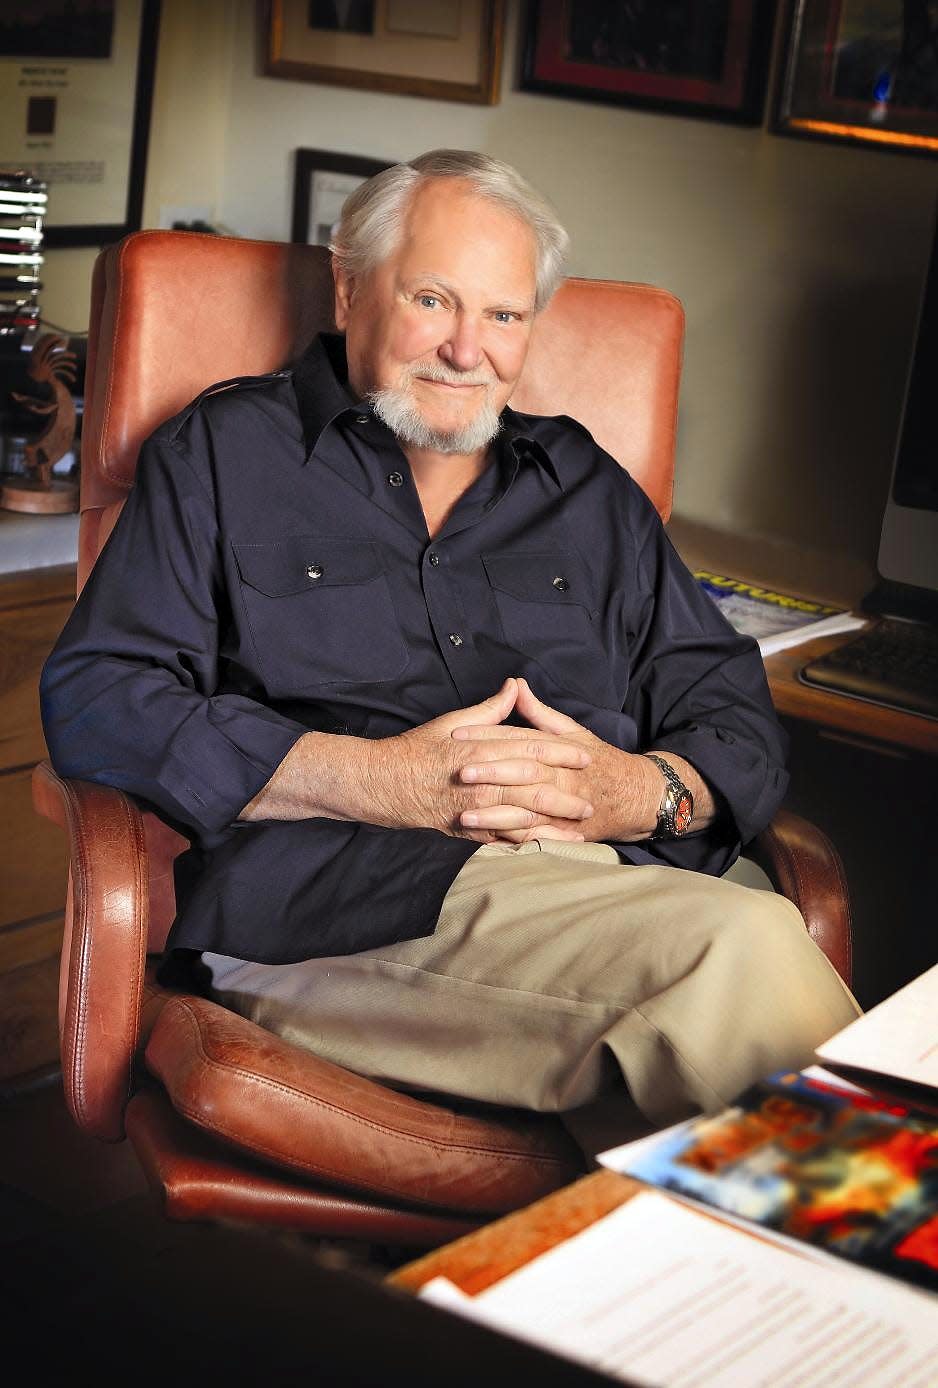 Clive Cussler, whose books sold millions of copies, died Feb. 24 at his home in Scottsdale, Arizona, at age 88. Cussler’s most popular and enduring creation was recurring character Dirk Pitt, the ultimate man’s man and globetrotting adventurer with the US National Underwater and Marine Agency (NUMA). Of his books, 73 titles that Cussler authored or co-authored hit USA TODAY’s Best-Selling Books List. His adventures have twice been adapted for the big screen: Pitt was portrayed by Richard Jordan in the 1980 film “Raise the Titanic” and by Matthew McConaughey in 2005's “Sahara.” Cussler’s newest book, “Journey of the Pharaohs,” goes on sale March 10.